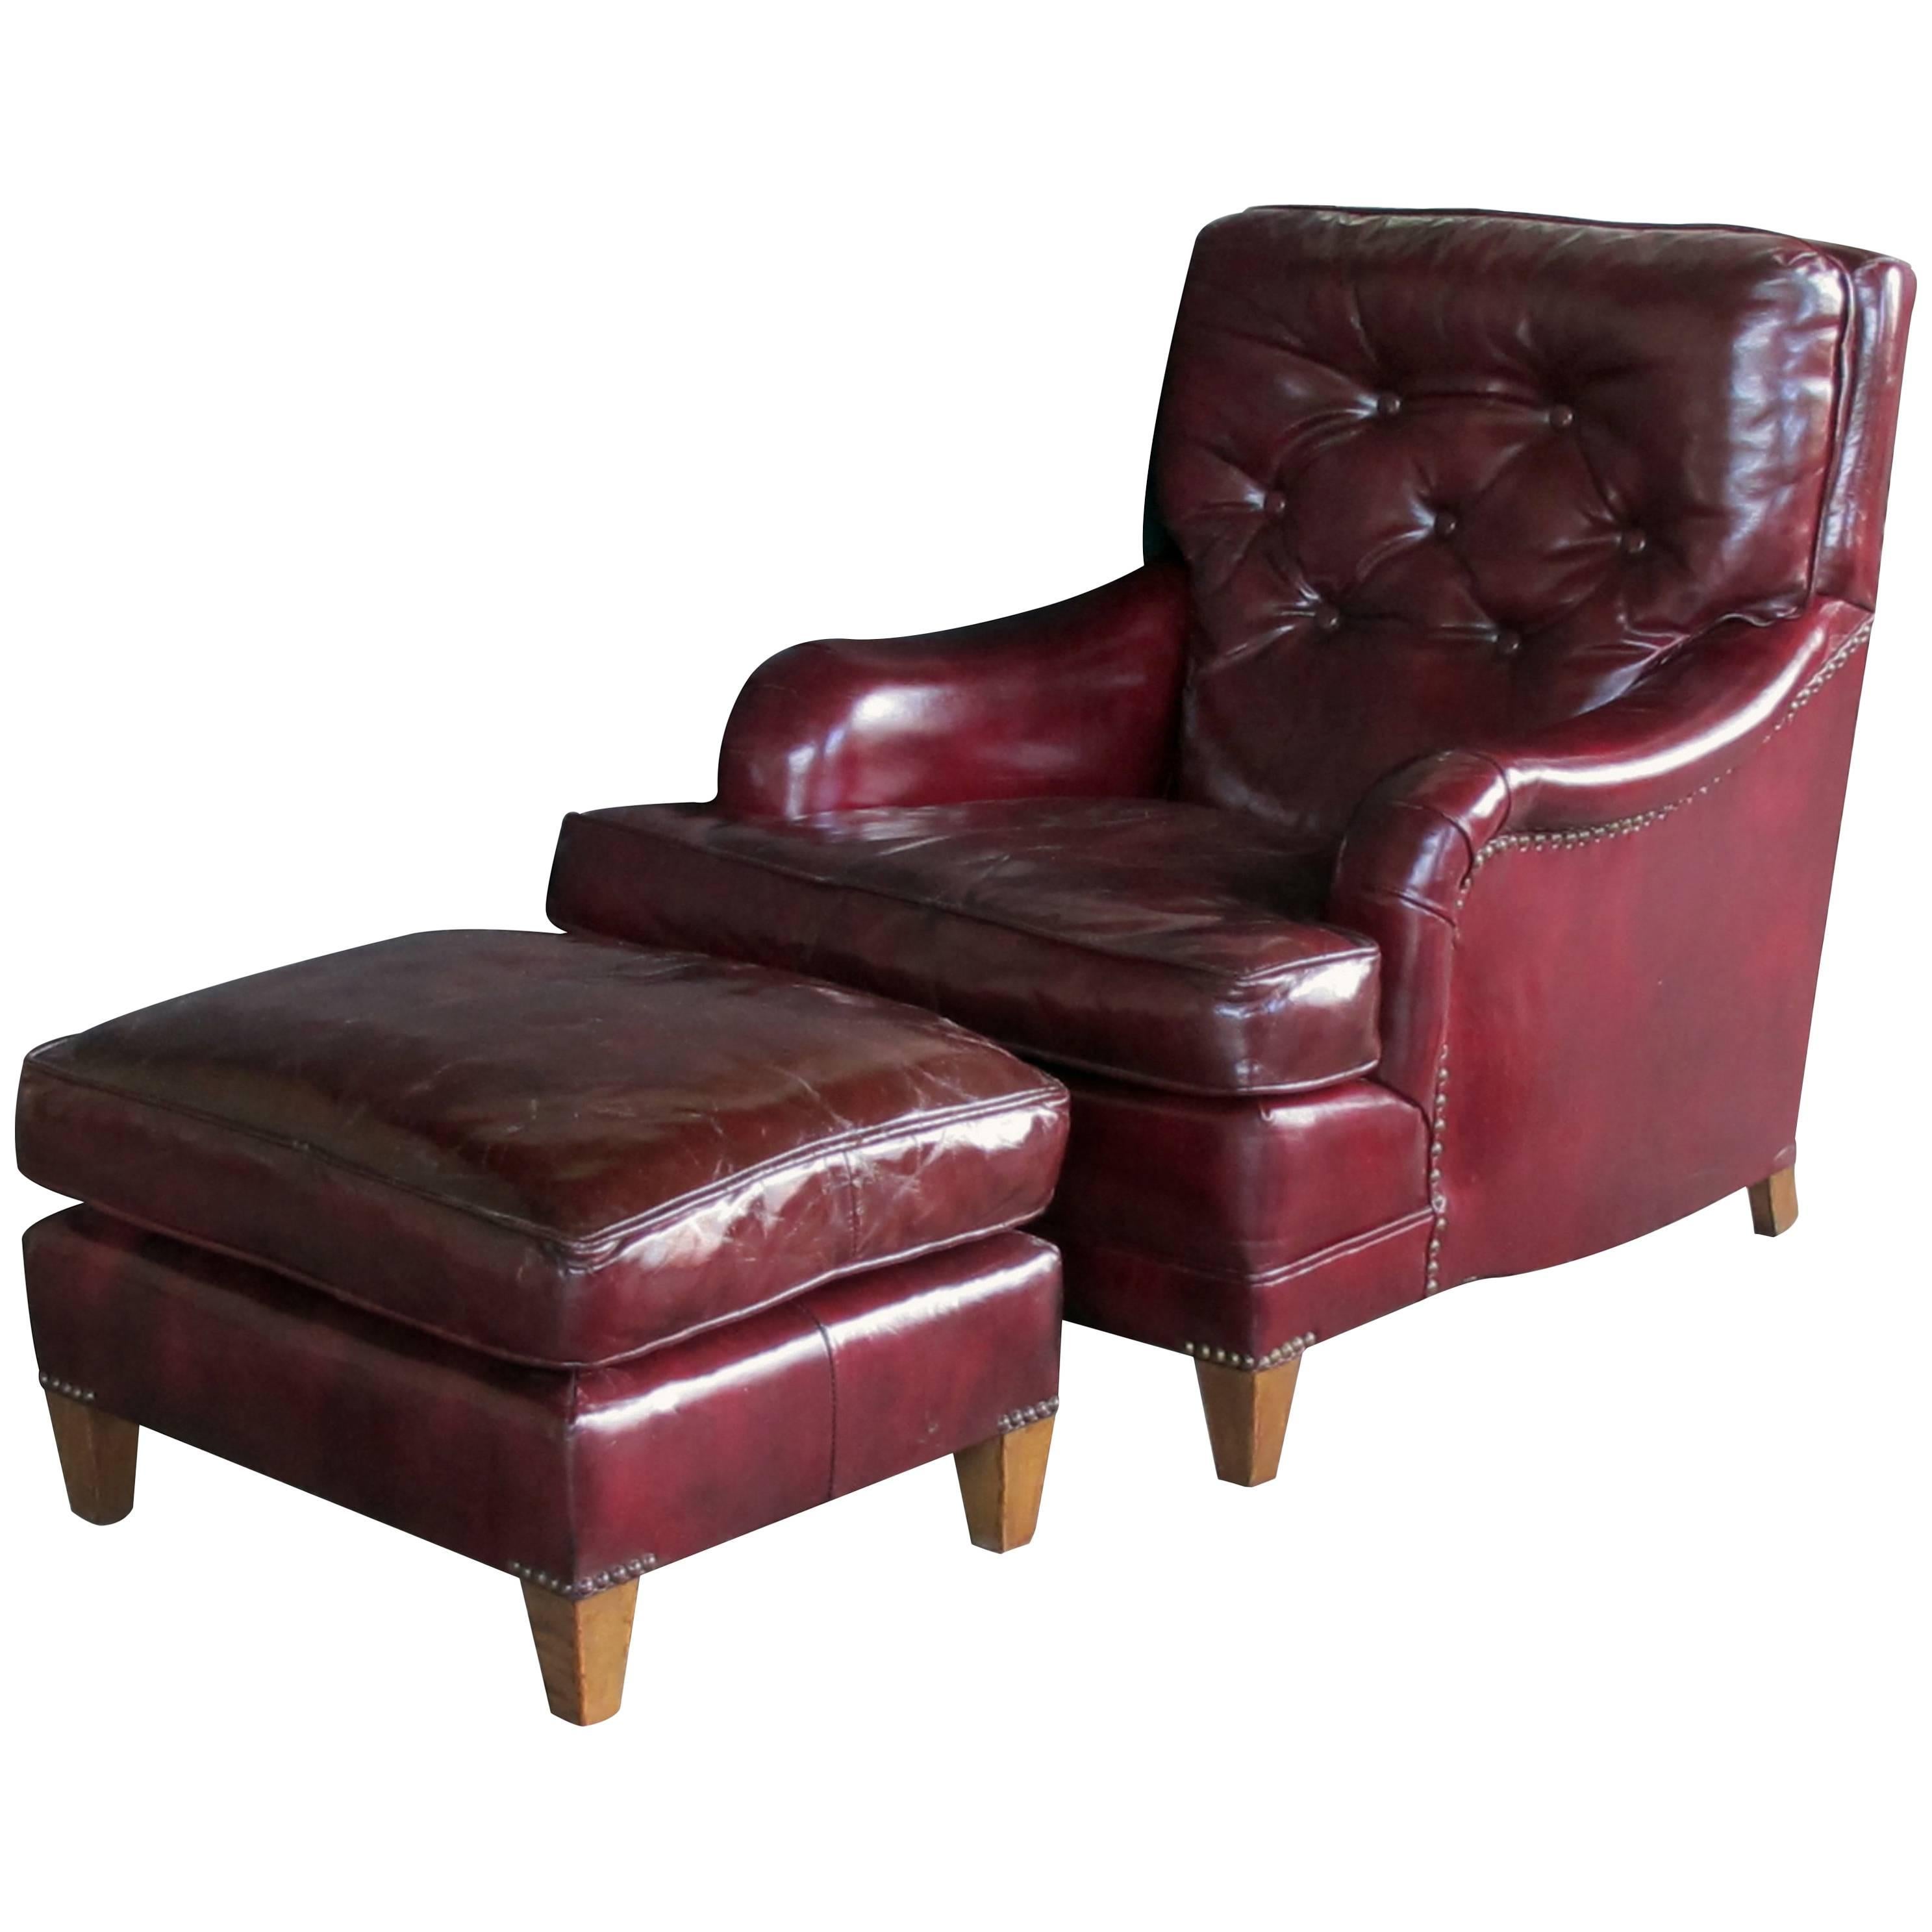 American 1940s Chesterfield Club Chair and Ottoman with Deep Burgundy Leather